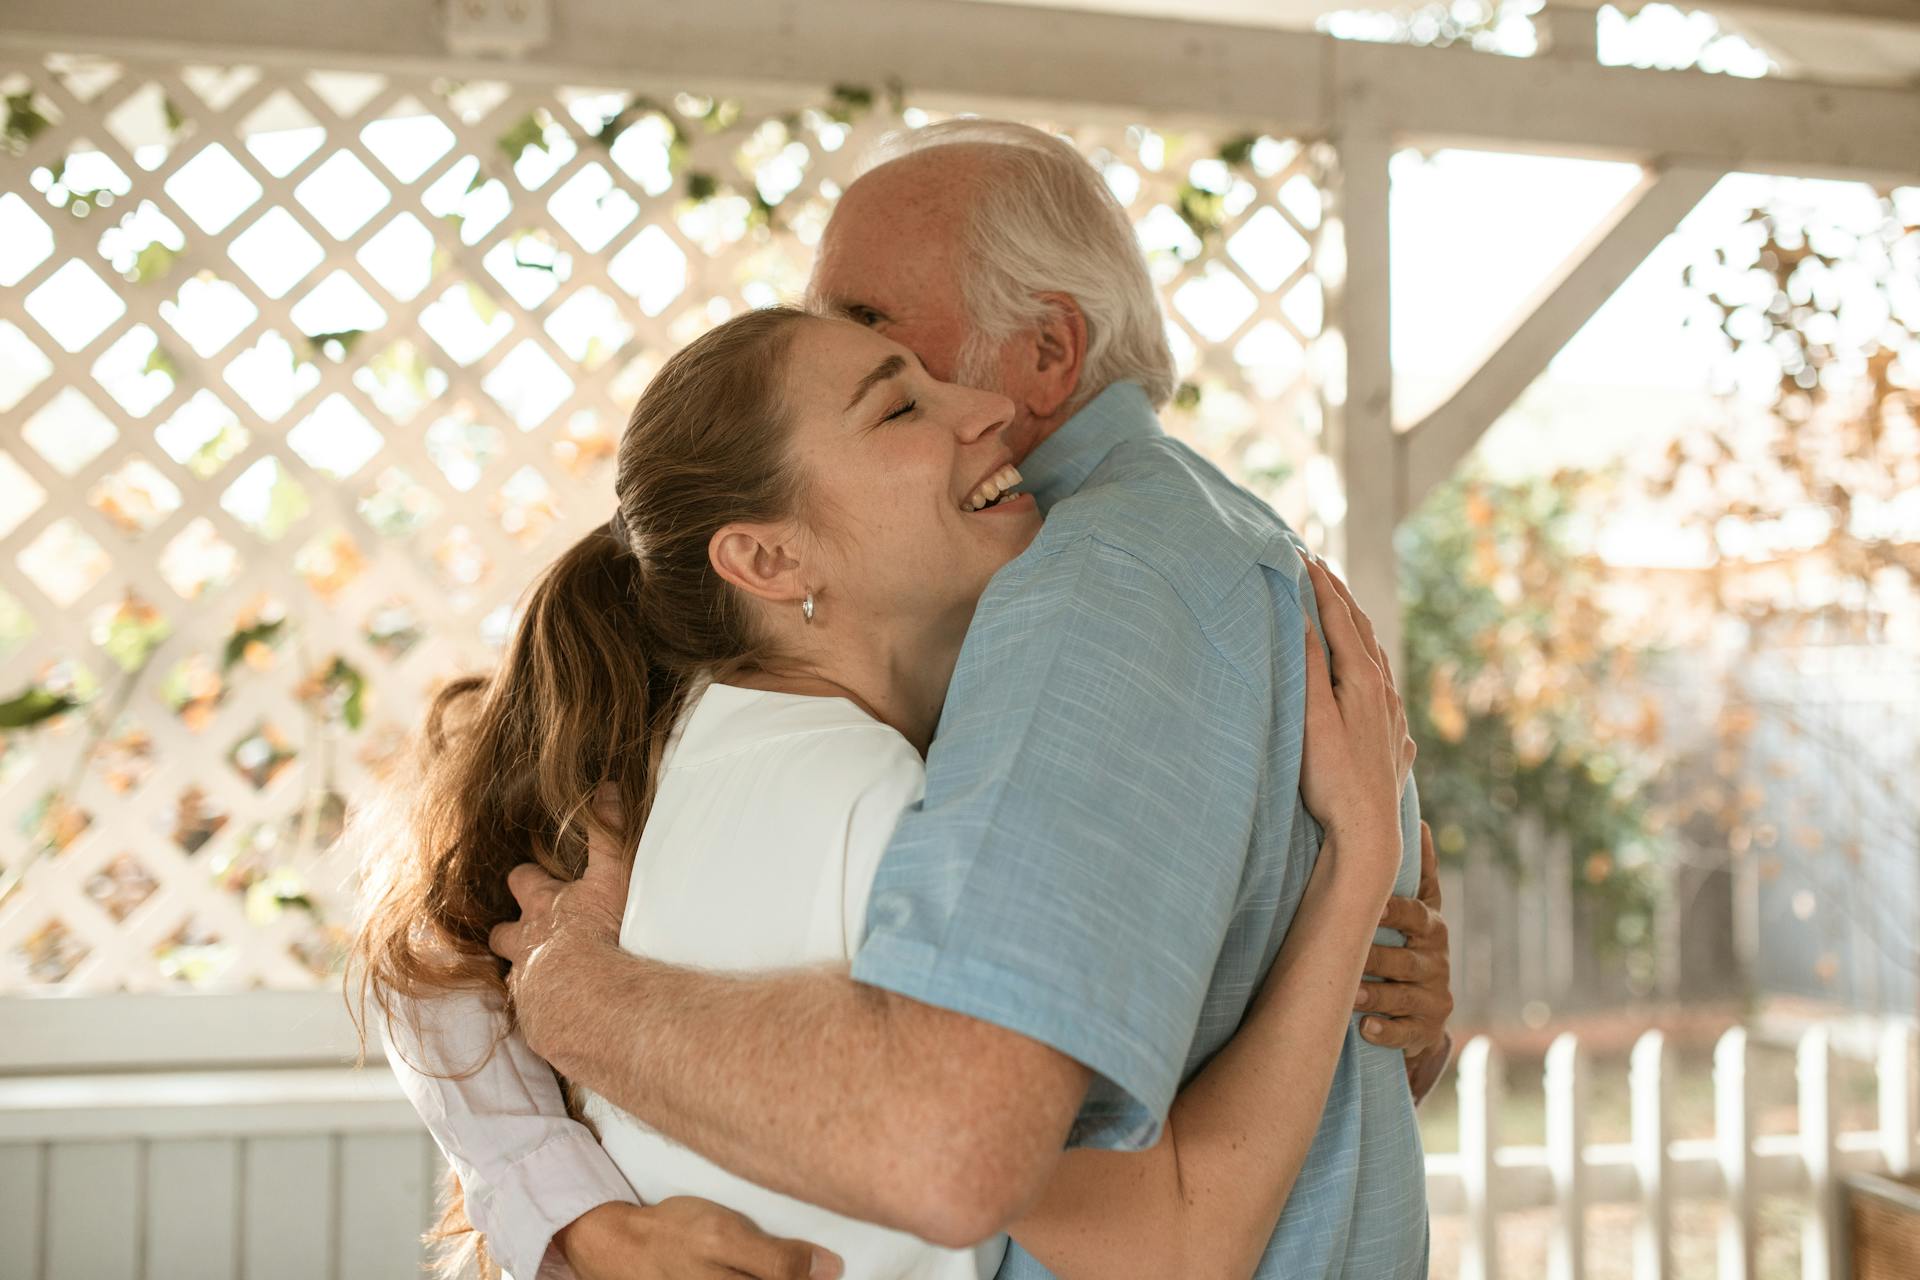 A father and daughter duo hugging | Source: Pexels